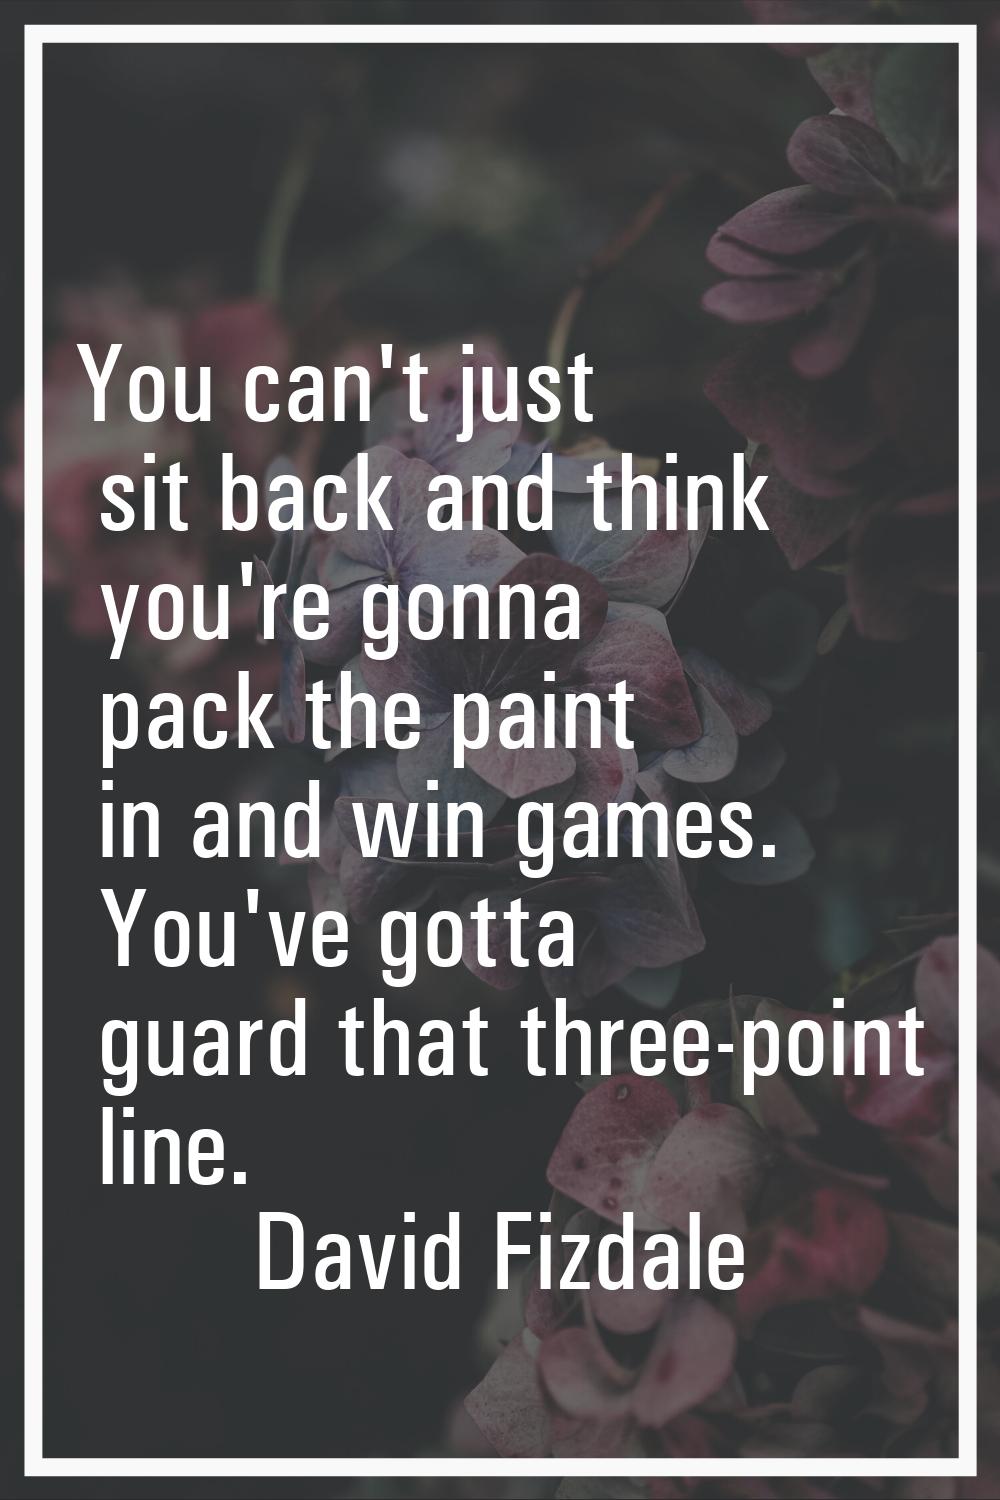 You can't just sit back and think you're gonna pack the paint in and win games. You've gotta guard 